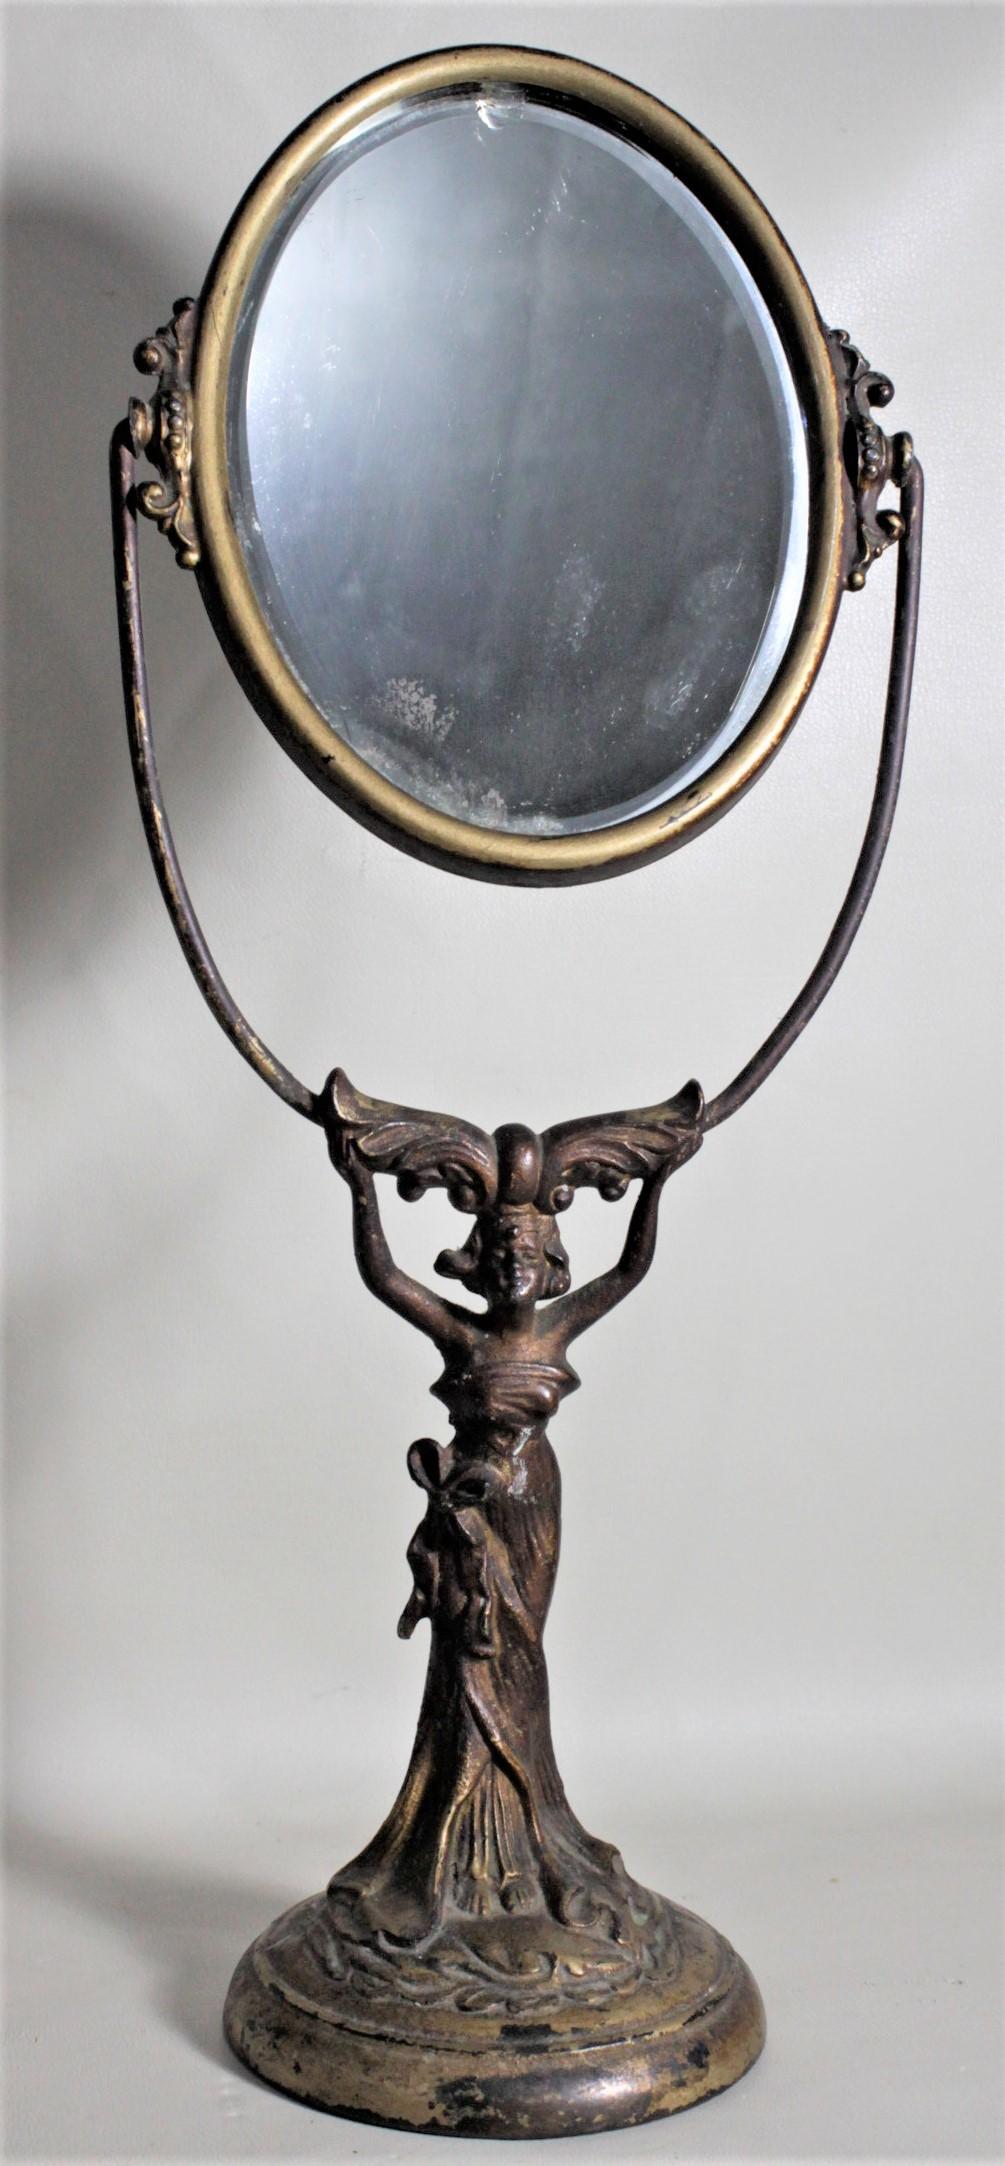 This antique cast figural ladies pedestal dresser mirror is unsigned, but presumed to have been made in France in circa 1890 in the period Art Nouveau style. The base of the mirror is a detailed cast metal woman in a flowing dress with a bronze